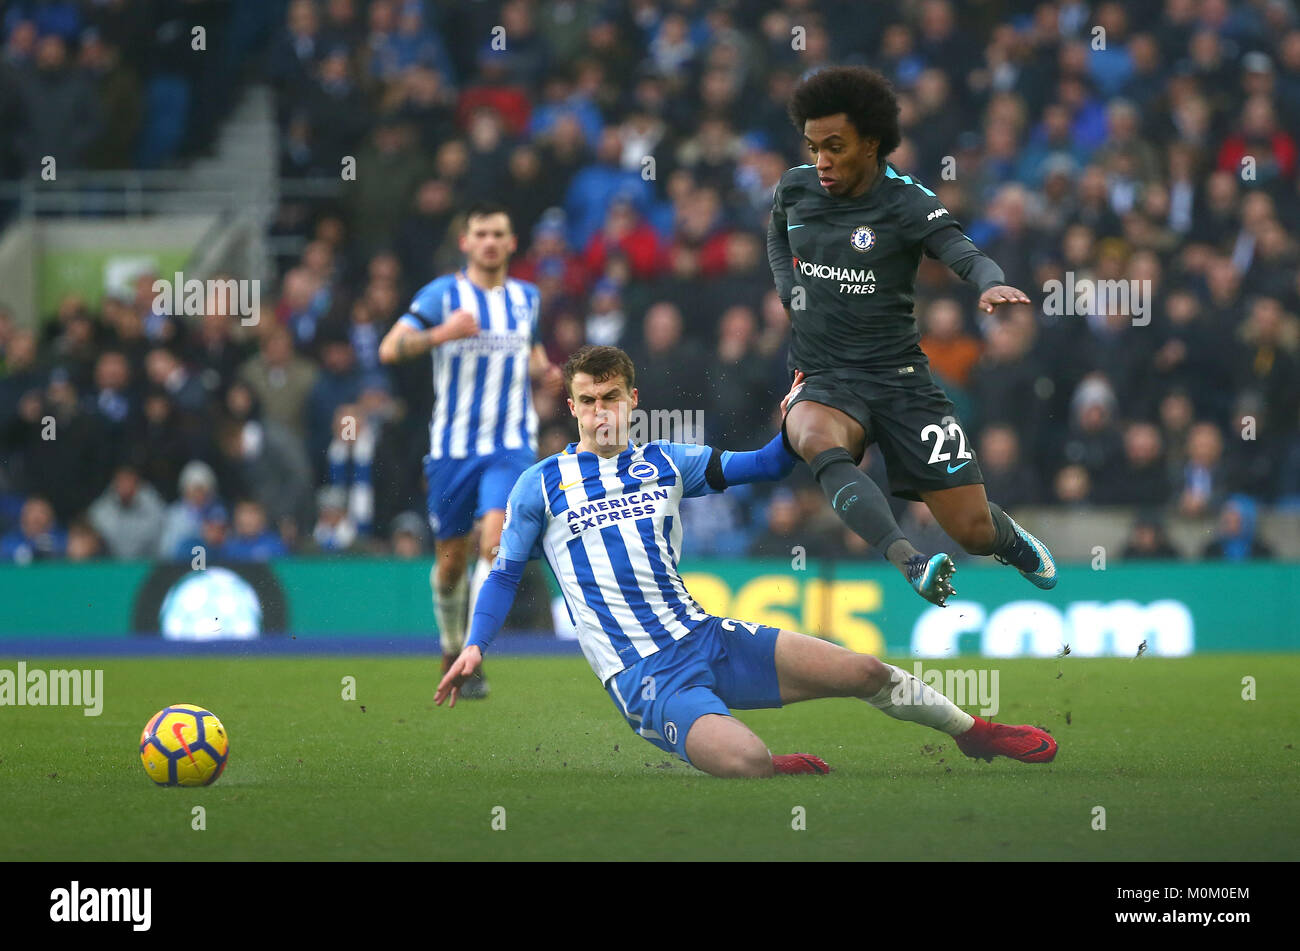 Willian of Chelsea evades a tackle from Solly March of Brighton during the Premier League match between Brighton and Hove Albion and Chelsea at the American Express Community Stadium in Brighton and Hove. 20 Jan 2018 Stock Photo